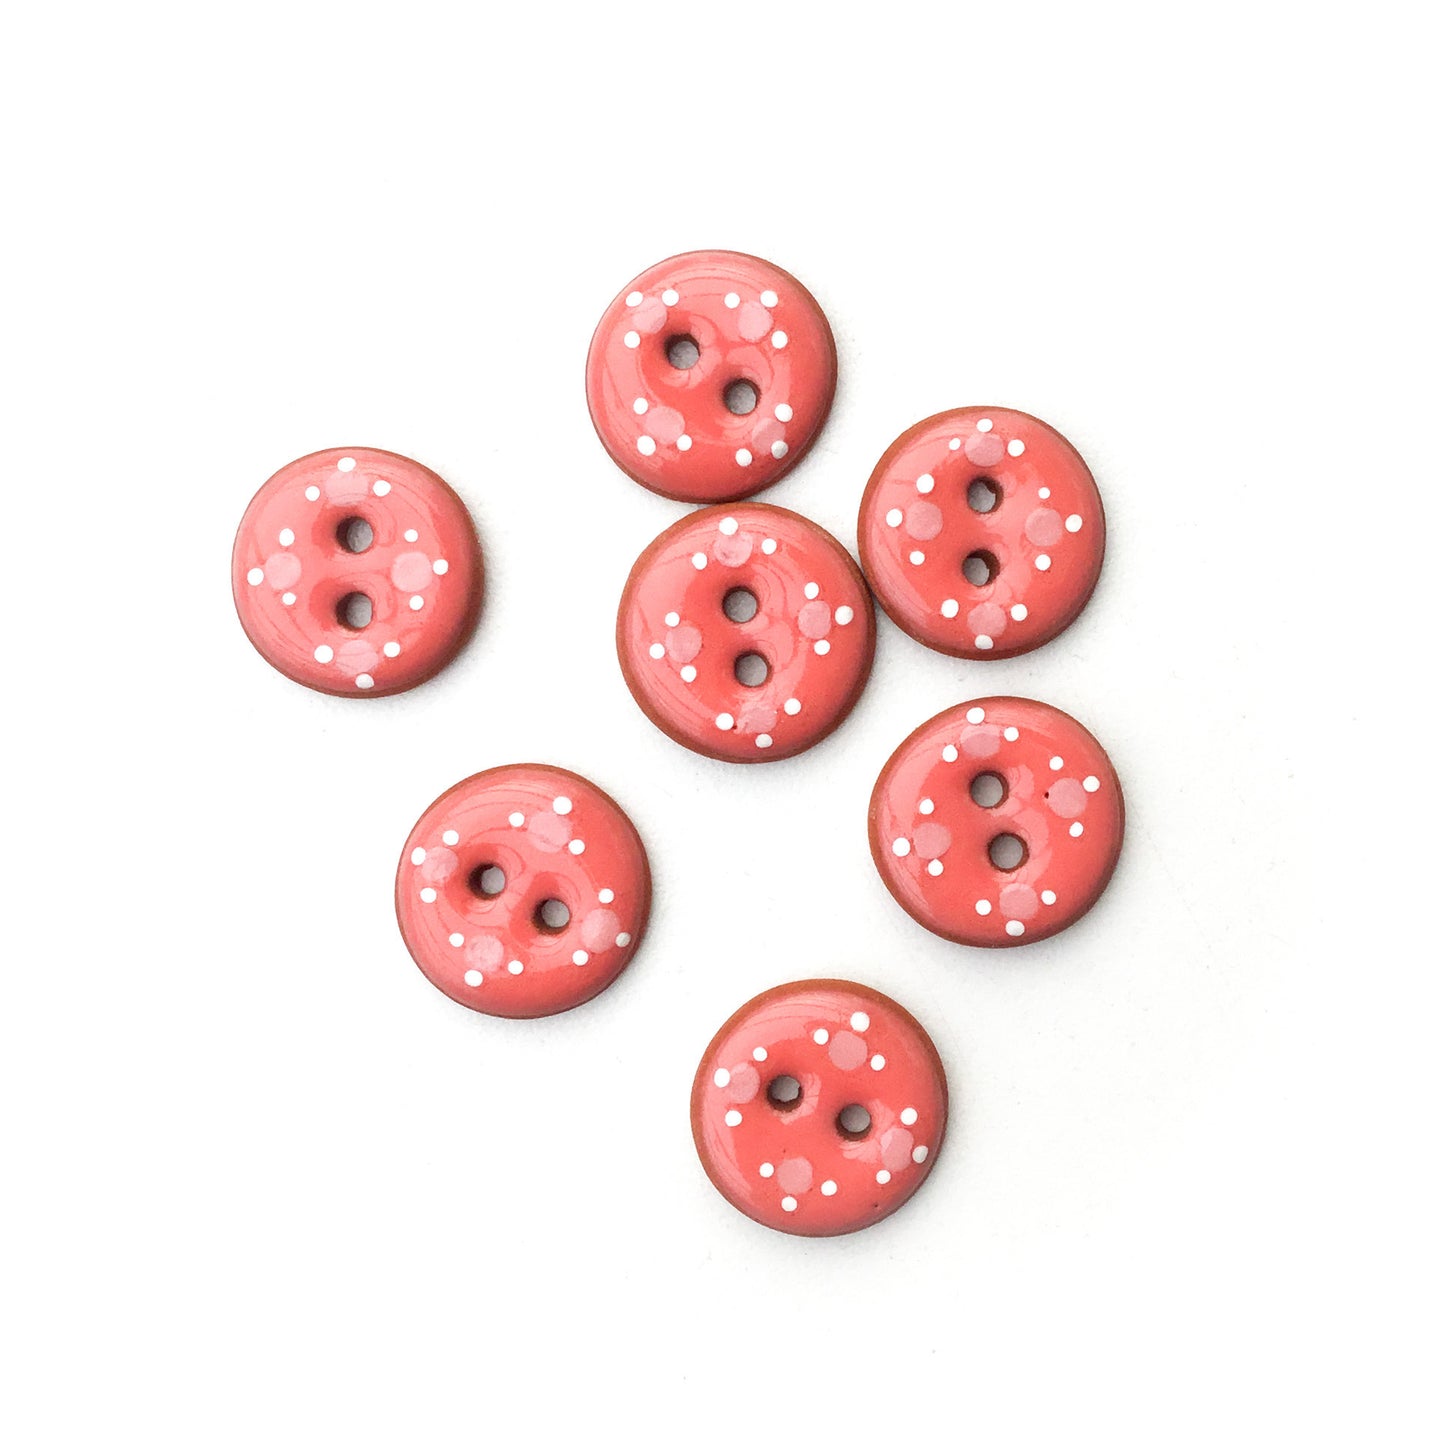 Decorative Coral Ceramic Buttons - Coral Clay Buttons - 11/16" - 7 Pack